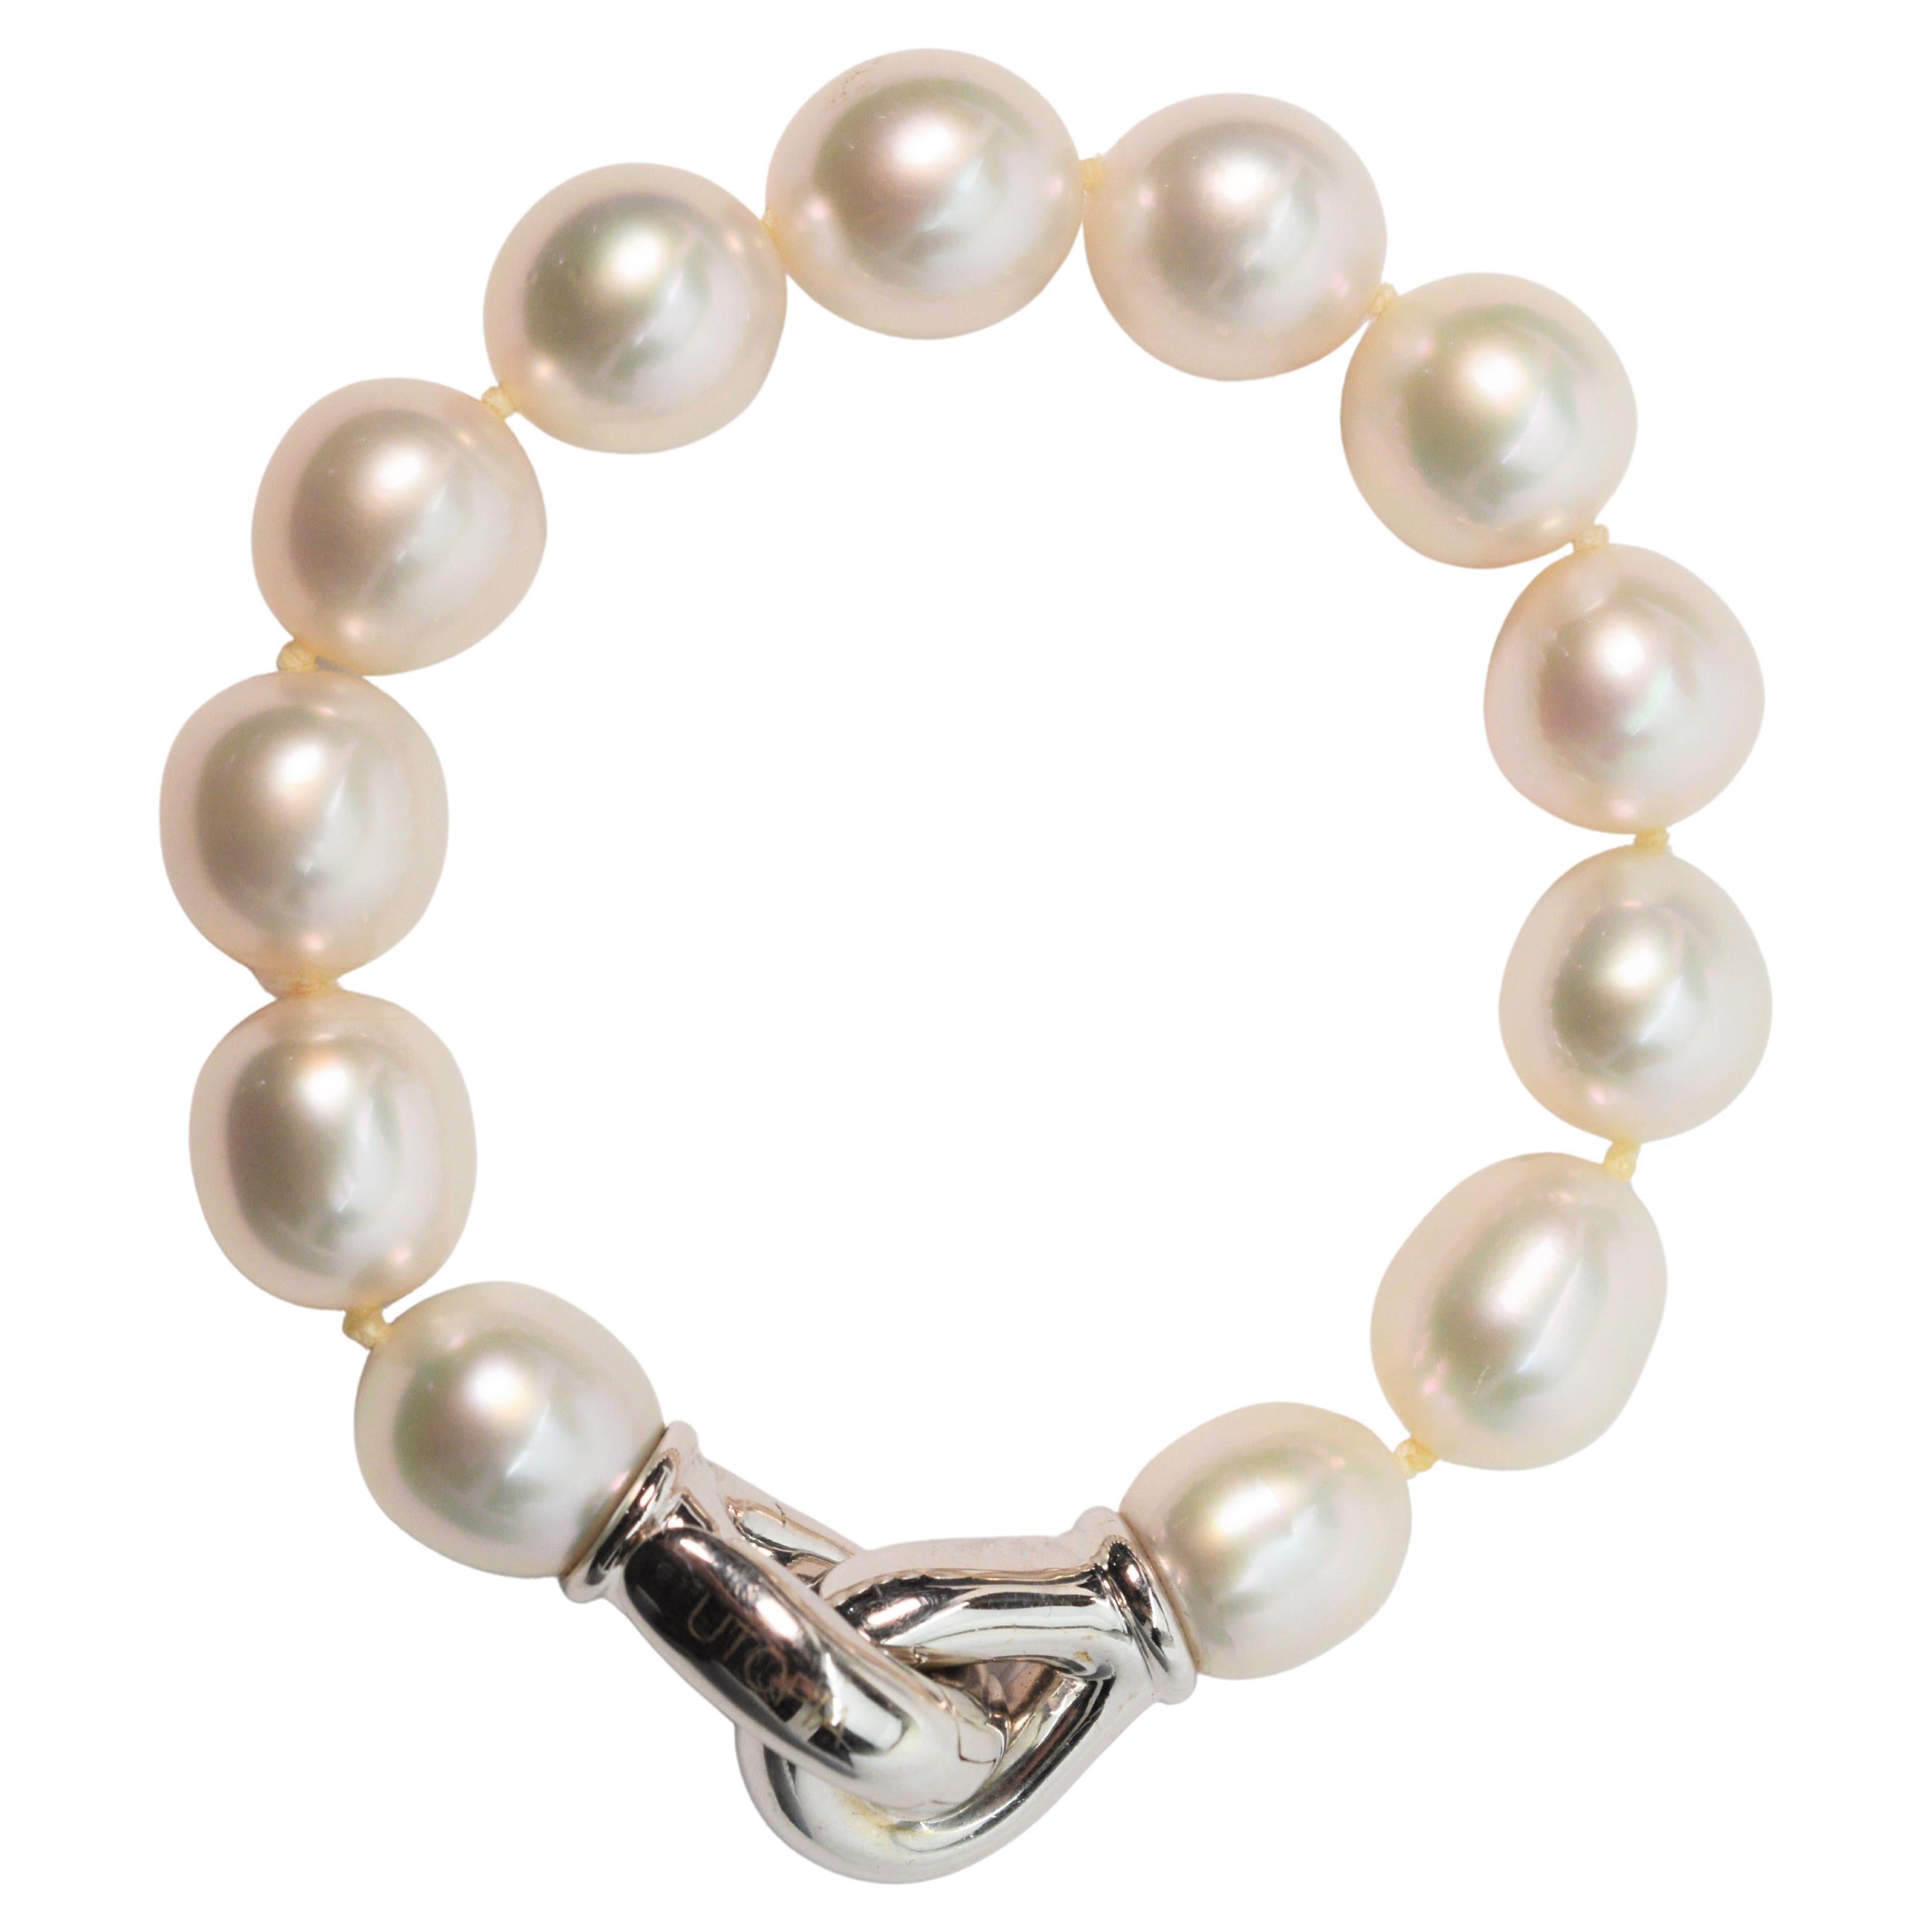 Impeccable Italian contemporary design by Paolo Gaia for UTOPIA Milan, this stunning bracelet has twelve carefully selected lustrous white South Sea pearls that are hand strung and knotted on this sleek version of a classic. With a stylized